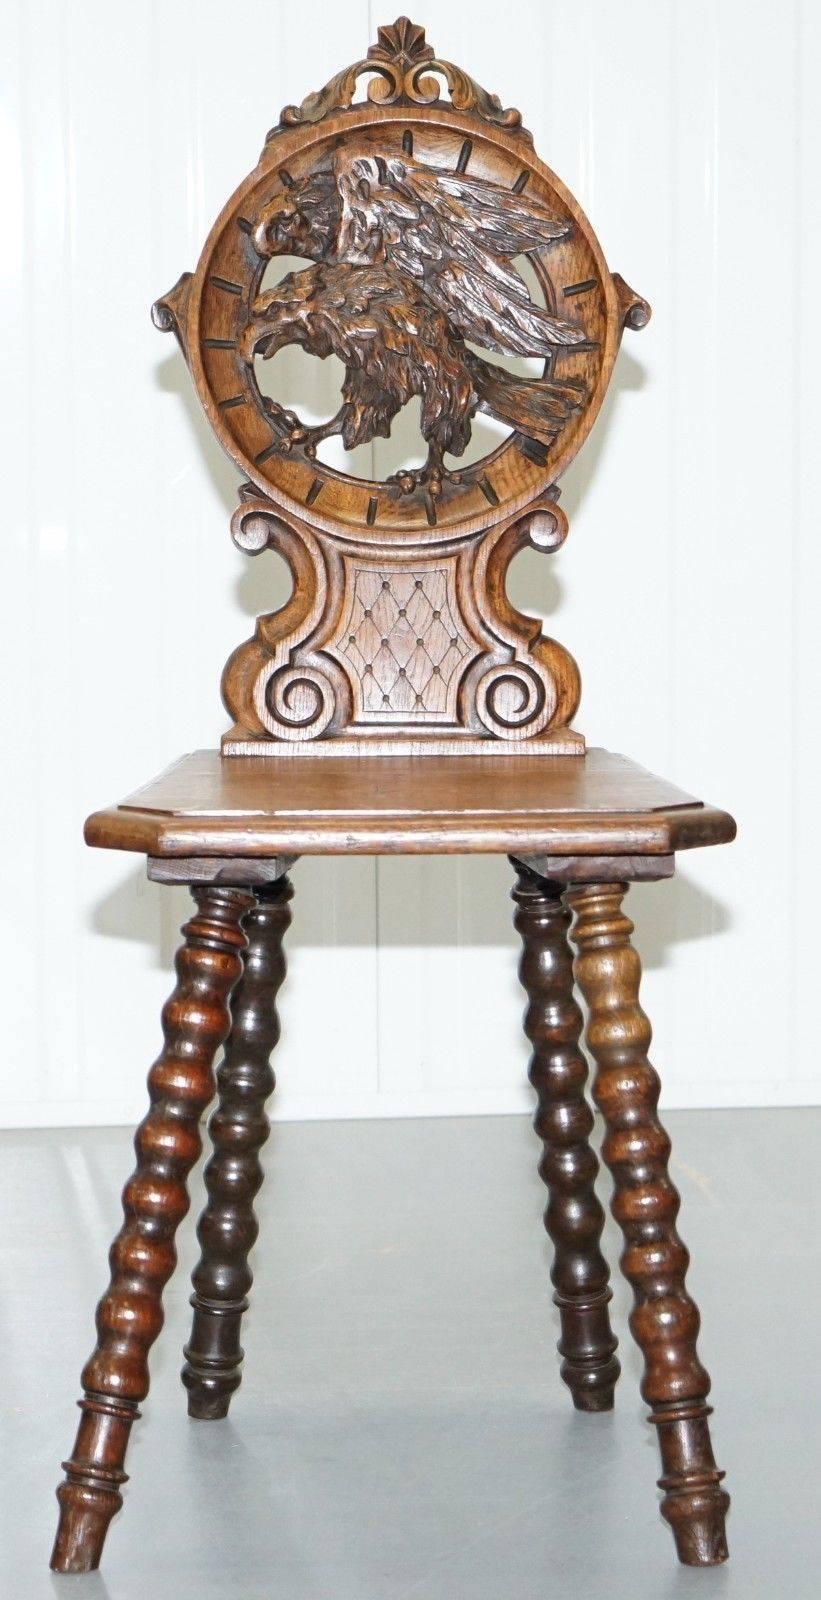 We are delighted to offer for sale this absolutely stunning Black Forrest Oak hand carved hall chair with bobbin turned legs and a large Hawk in the back, circa early 19th century

One of the best looking chairs I have ever seen, the carving was